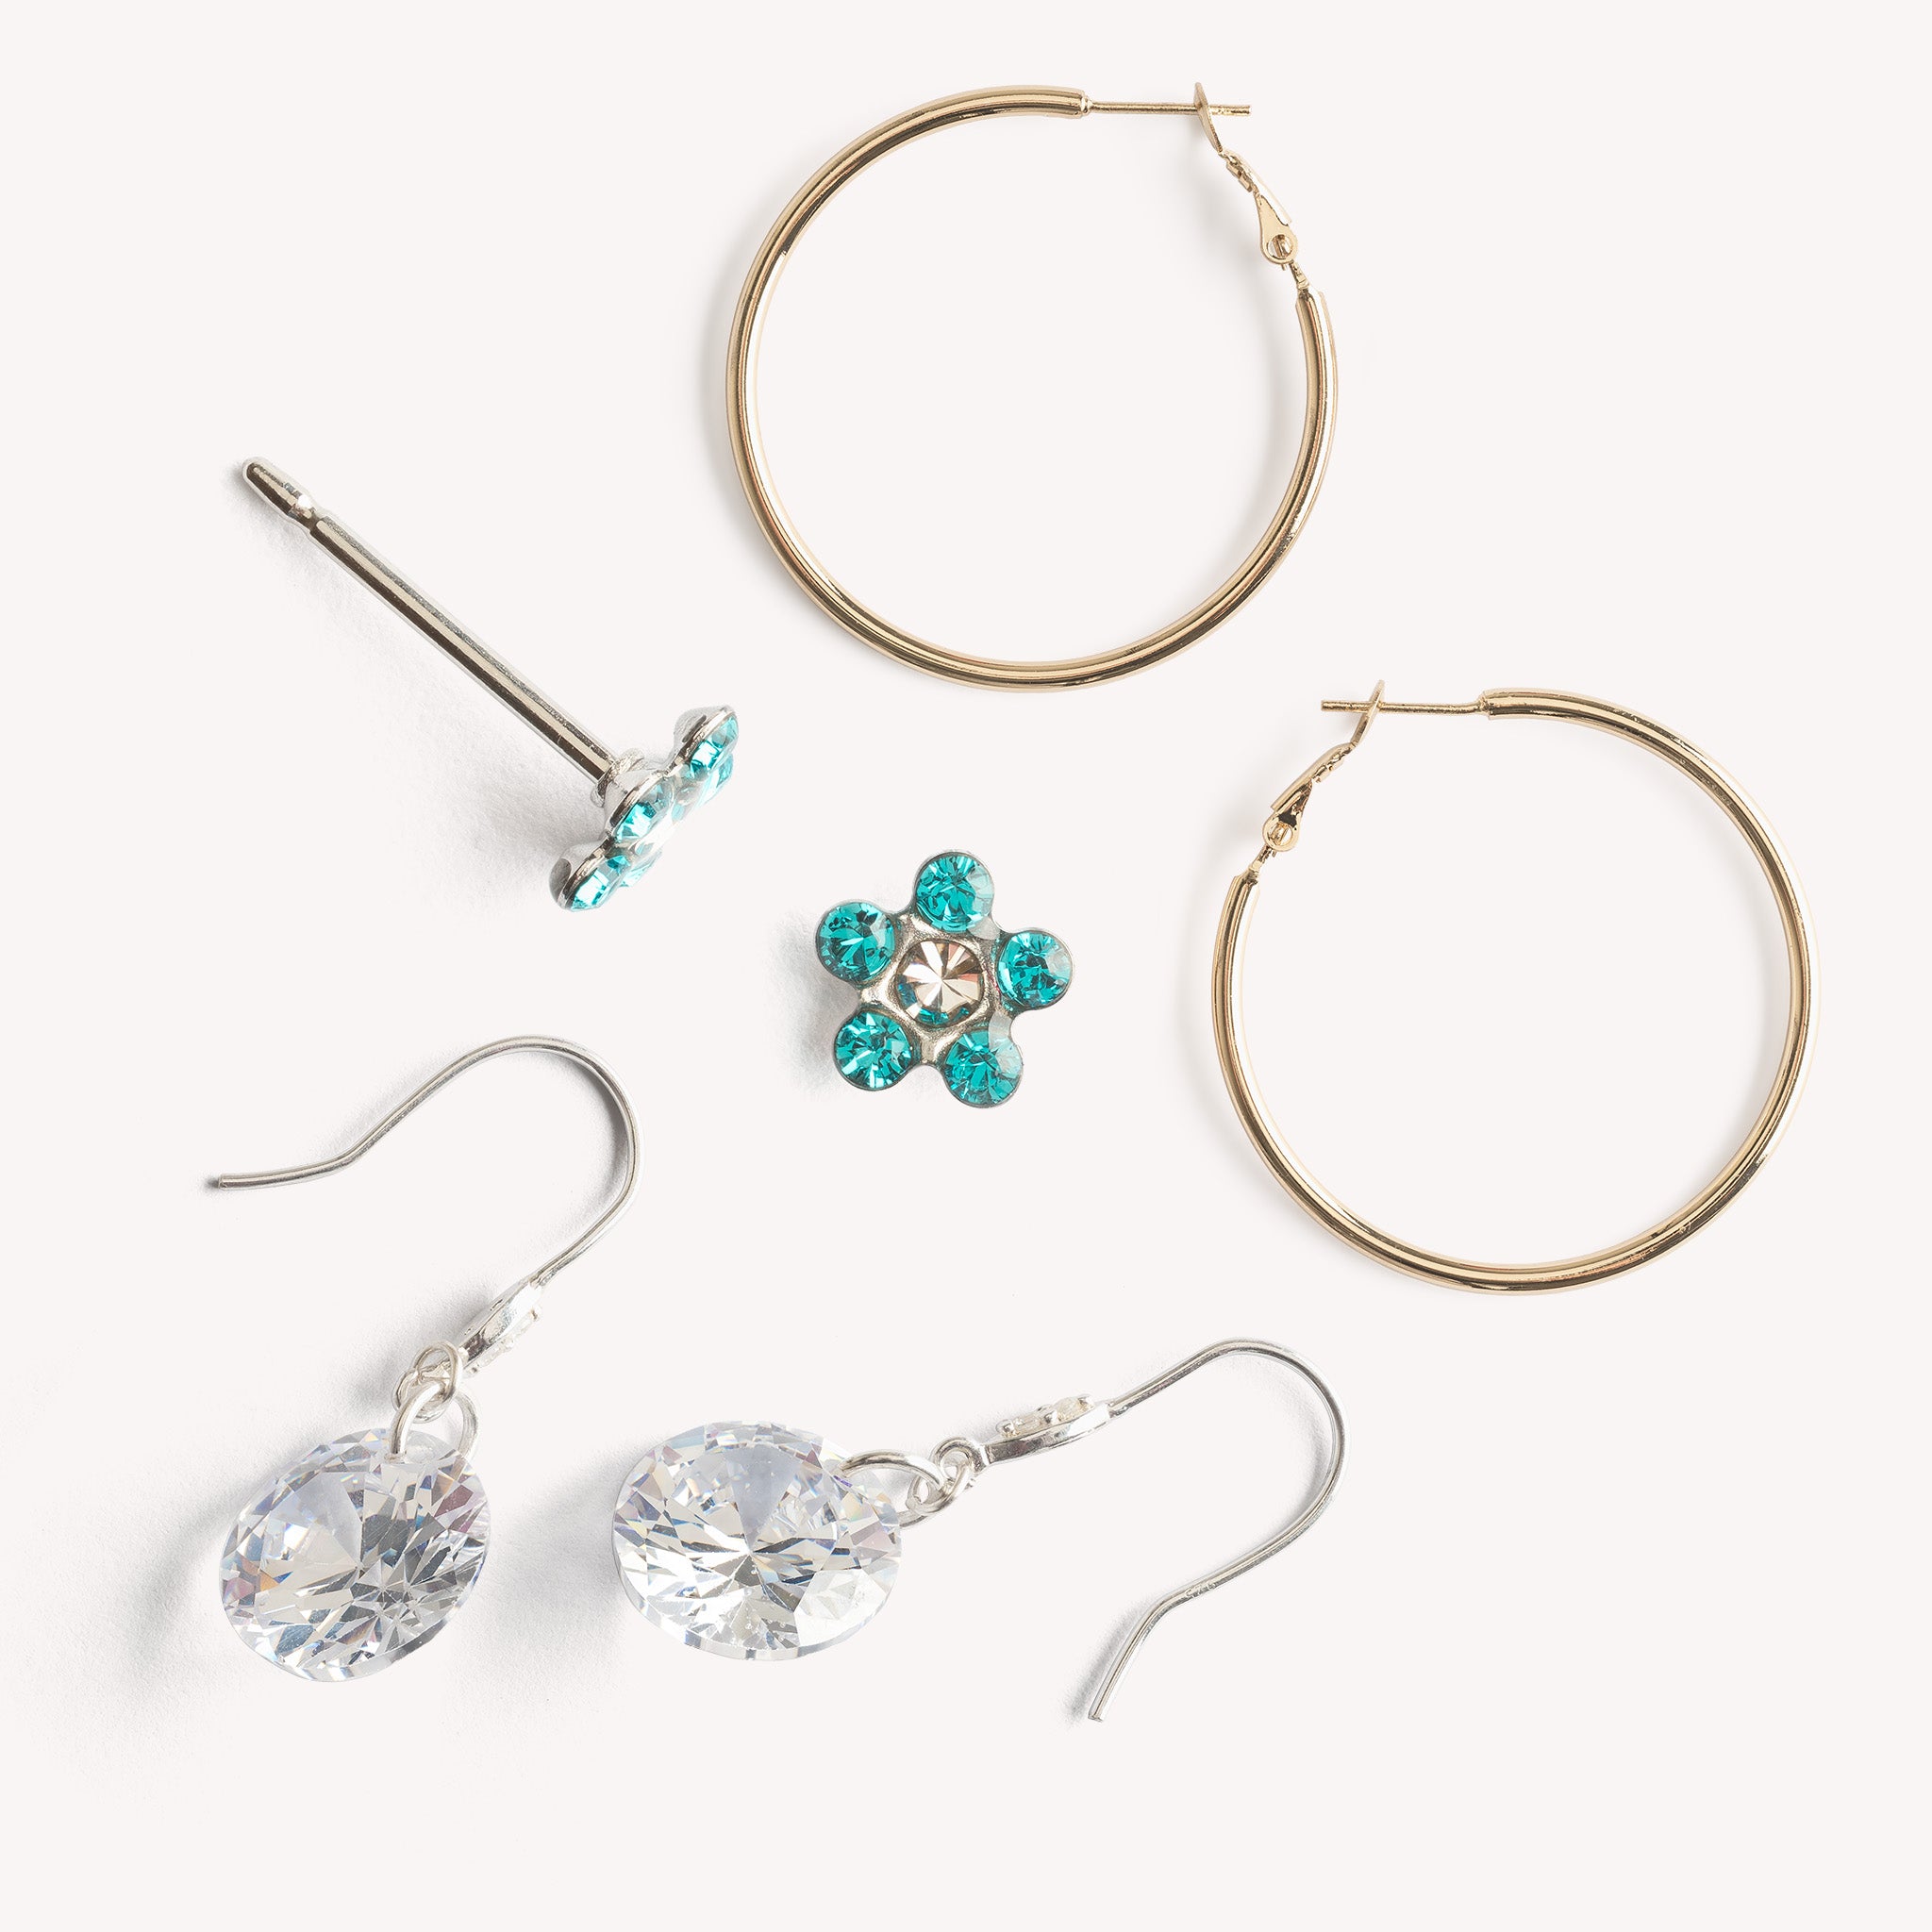 Hypoallergenic Metals: Which Earrings & Jewelry are Best for Sensitive - Q  Evon